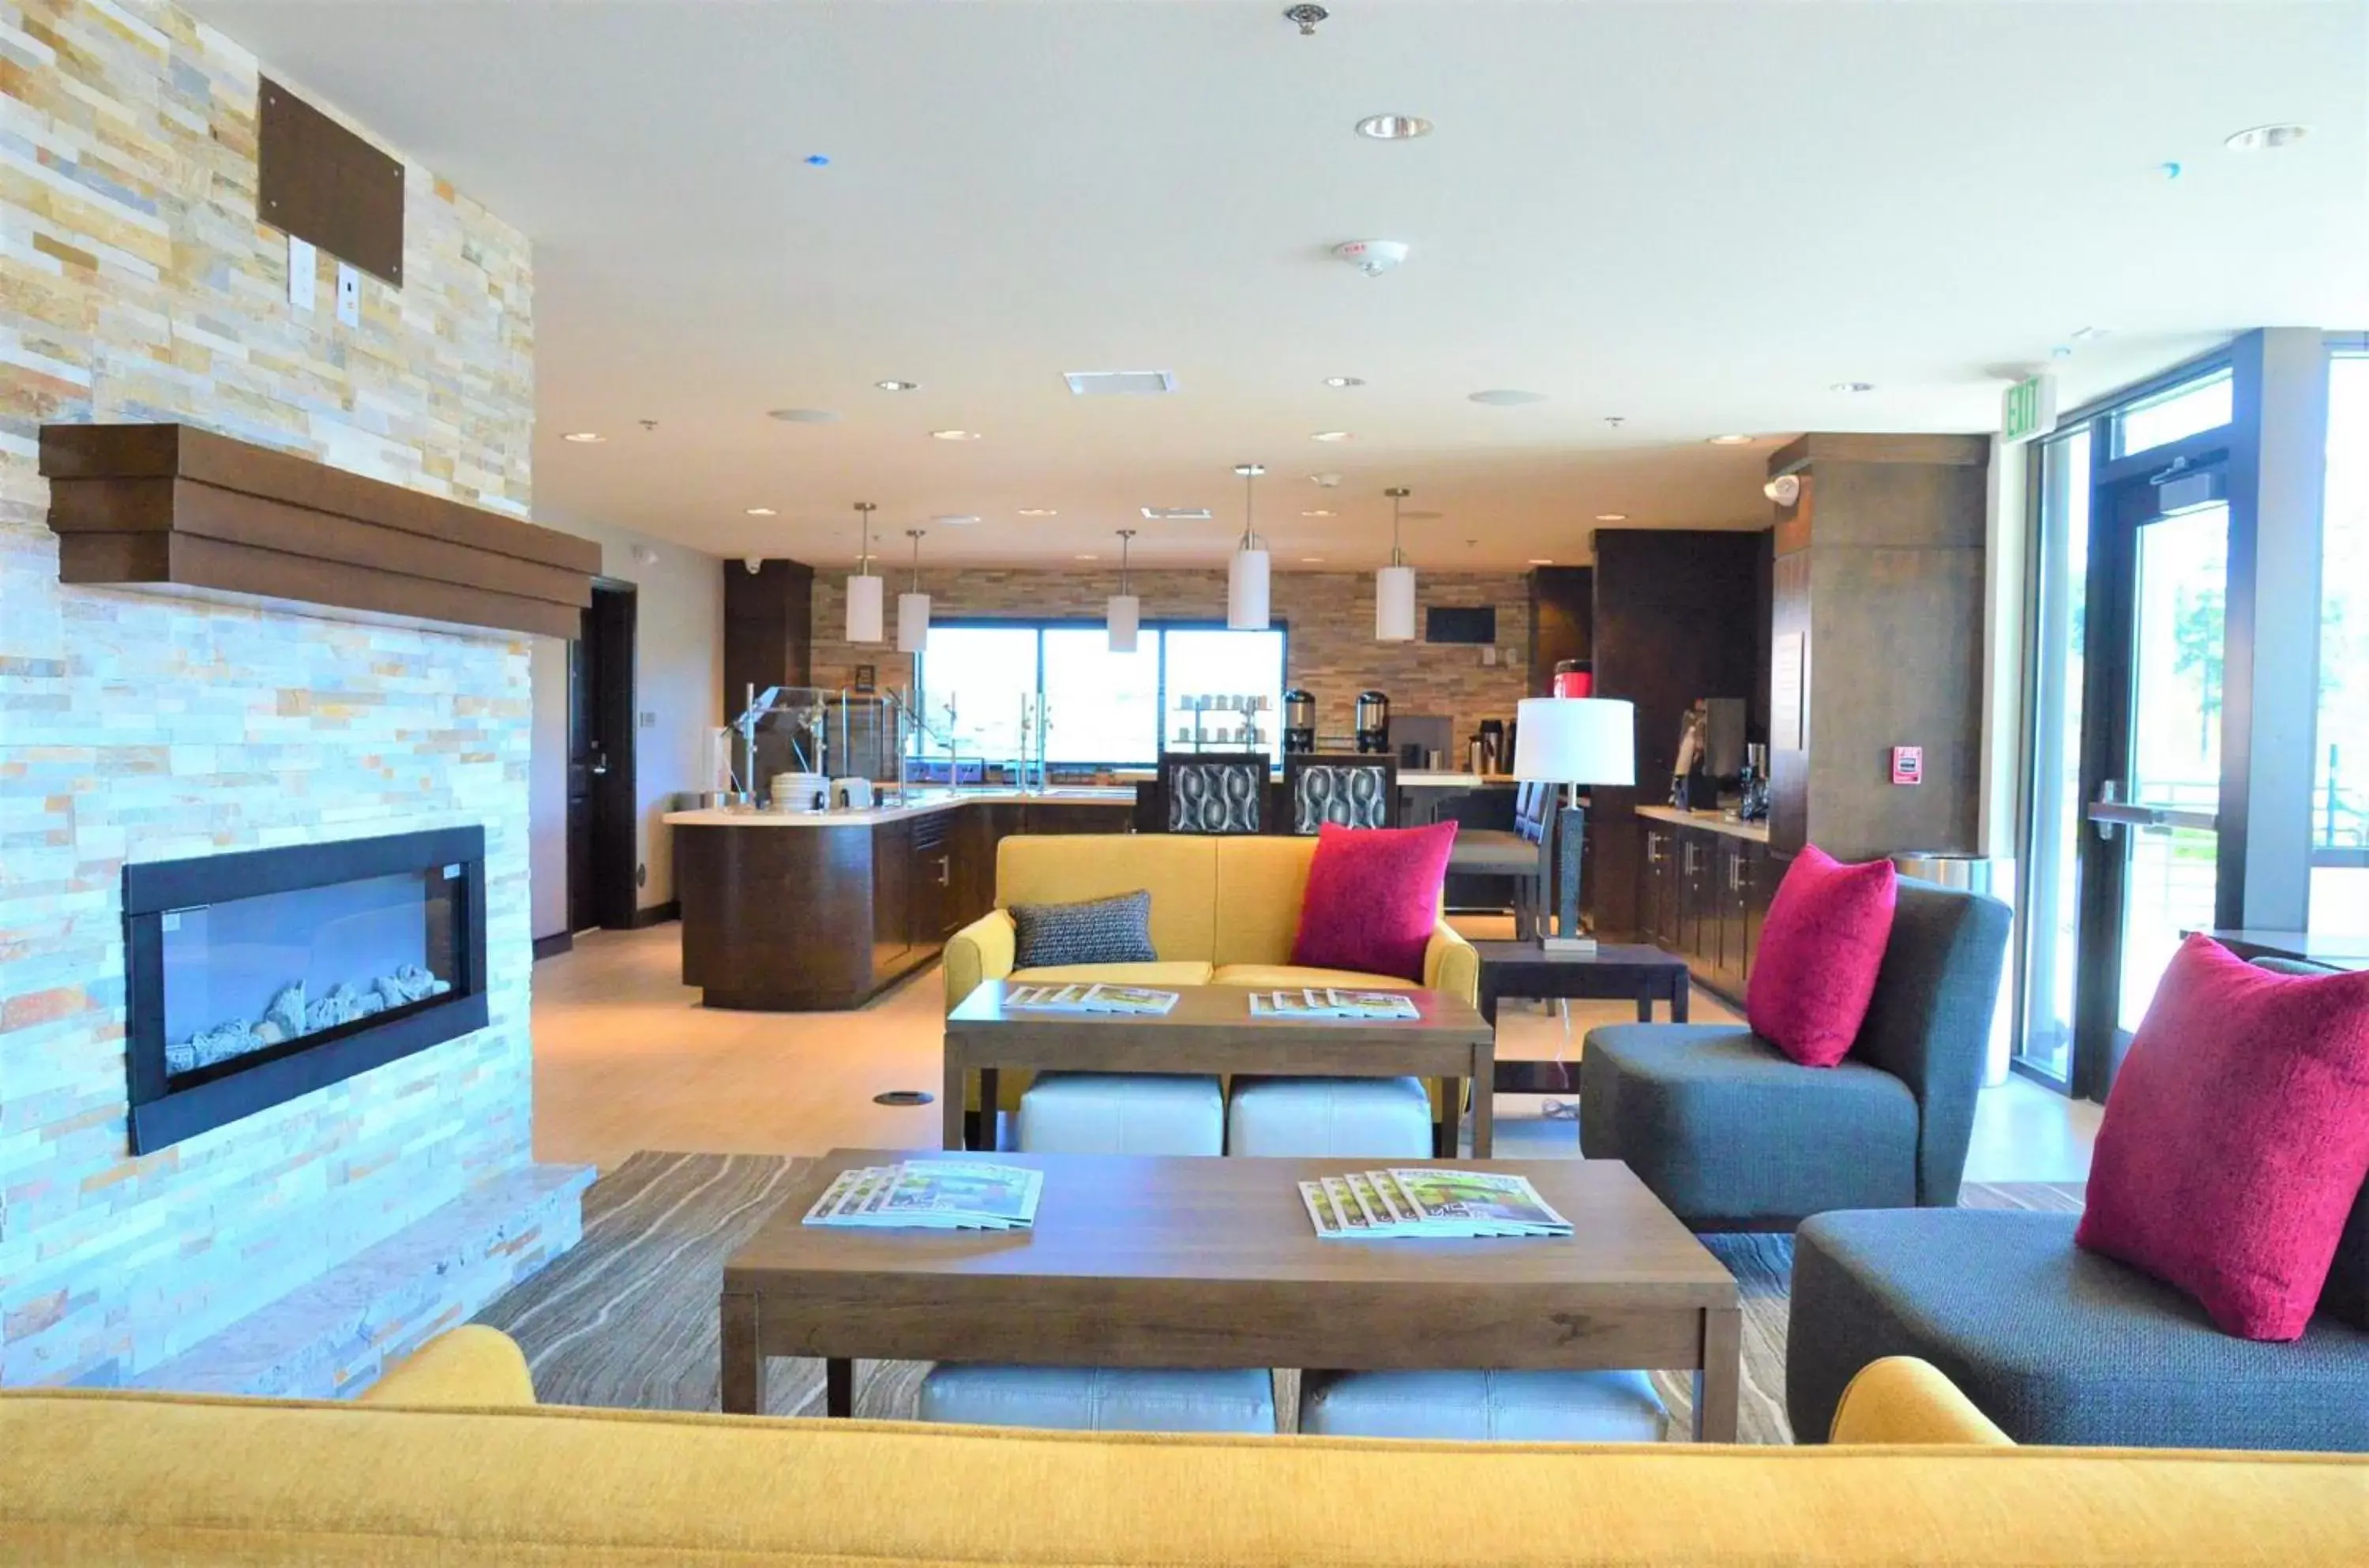 Lobby or reception in Staybridge Suites - Orenco Station, an IHG Hotel